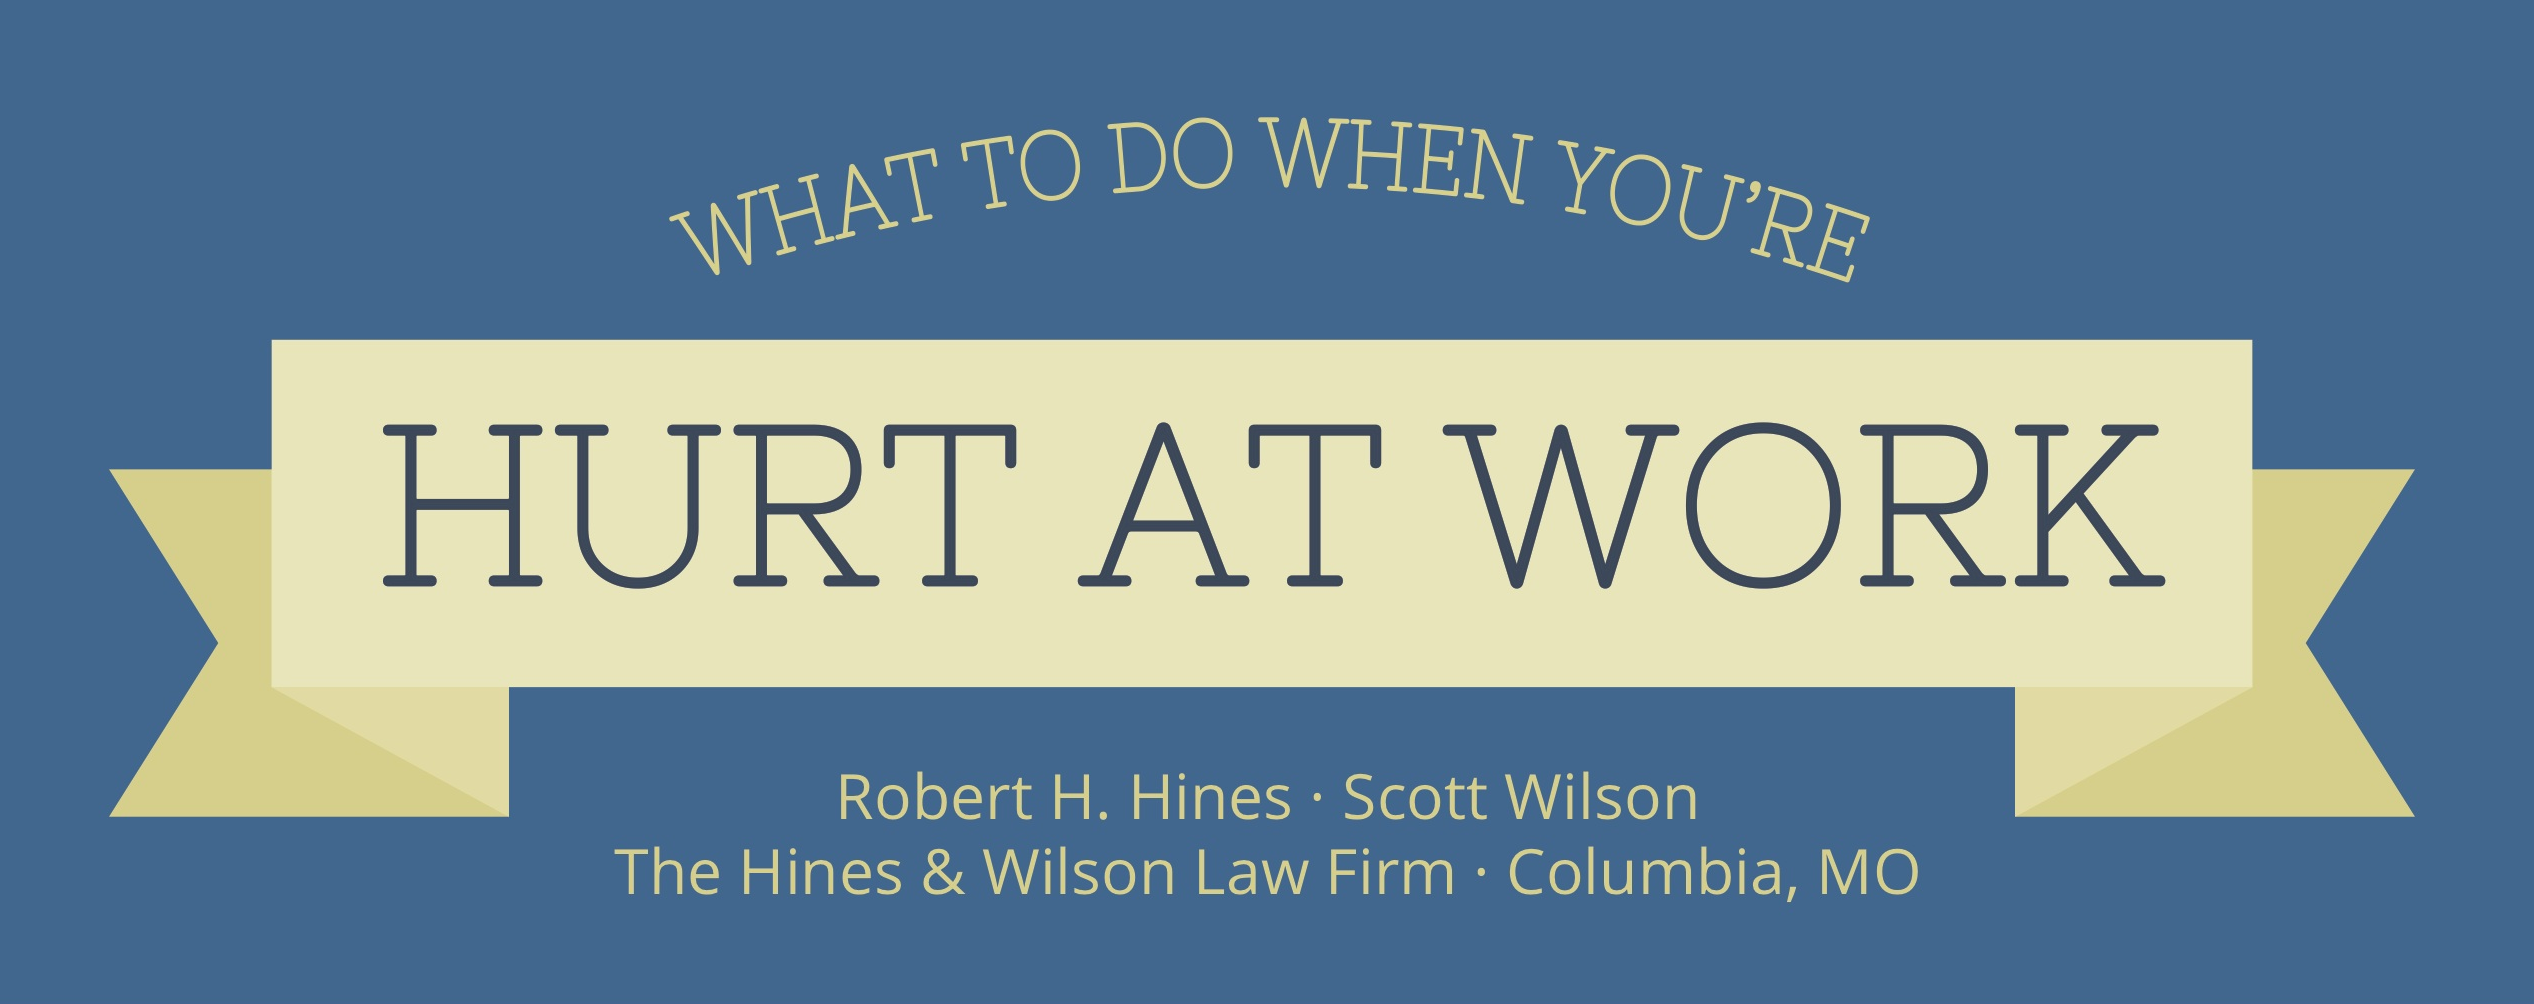 what to do when you're hurt at work infographic header